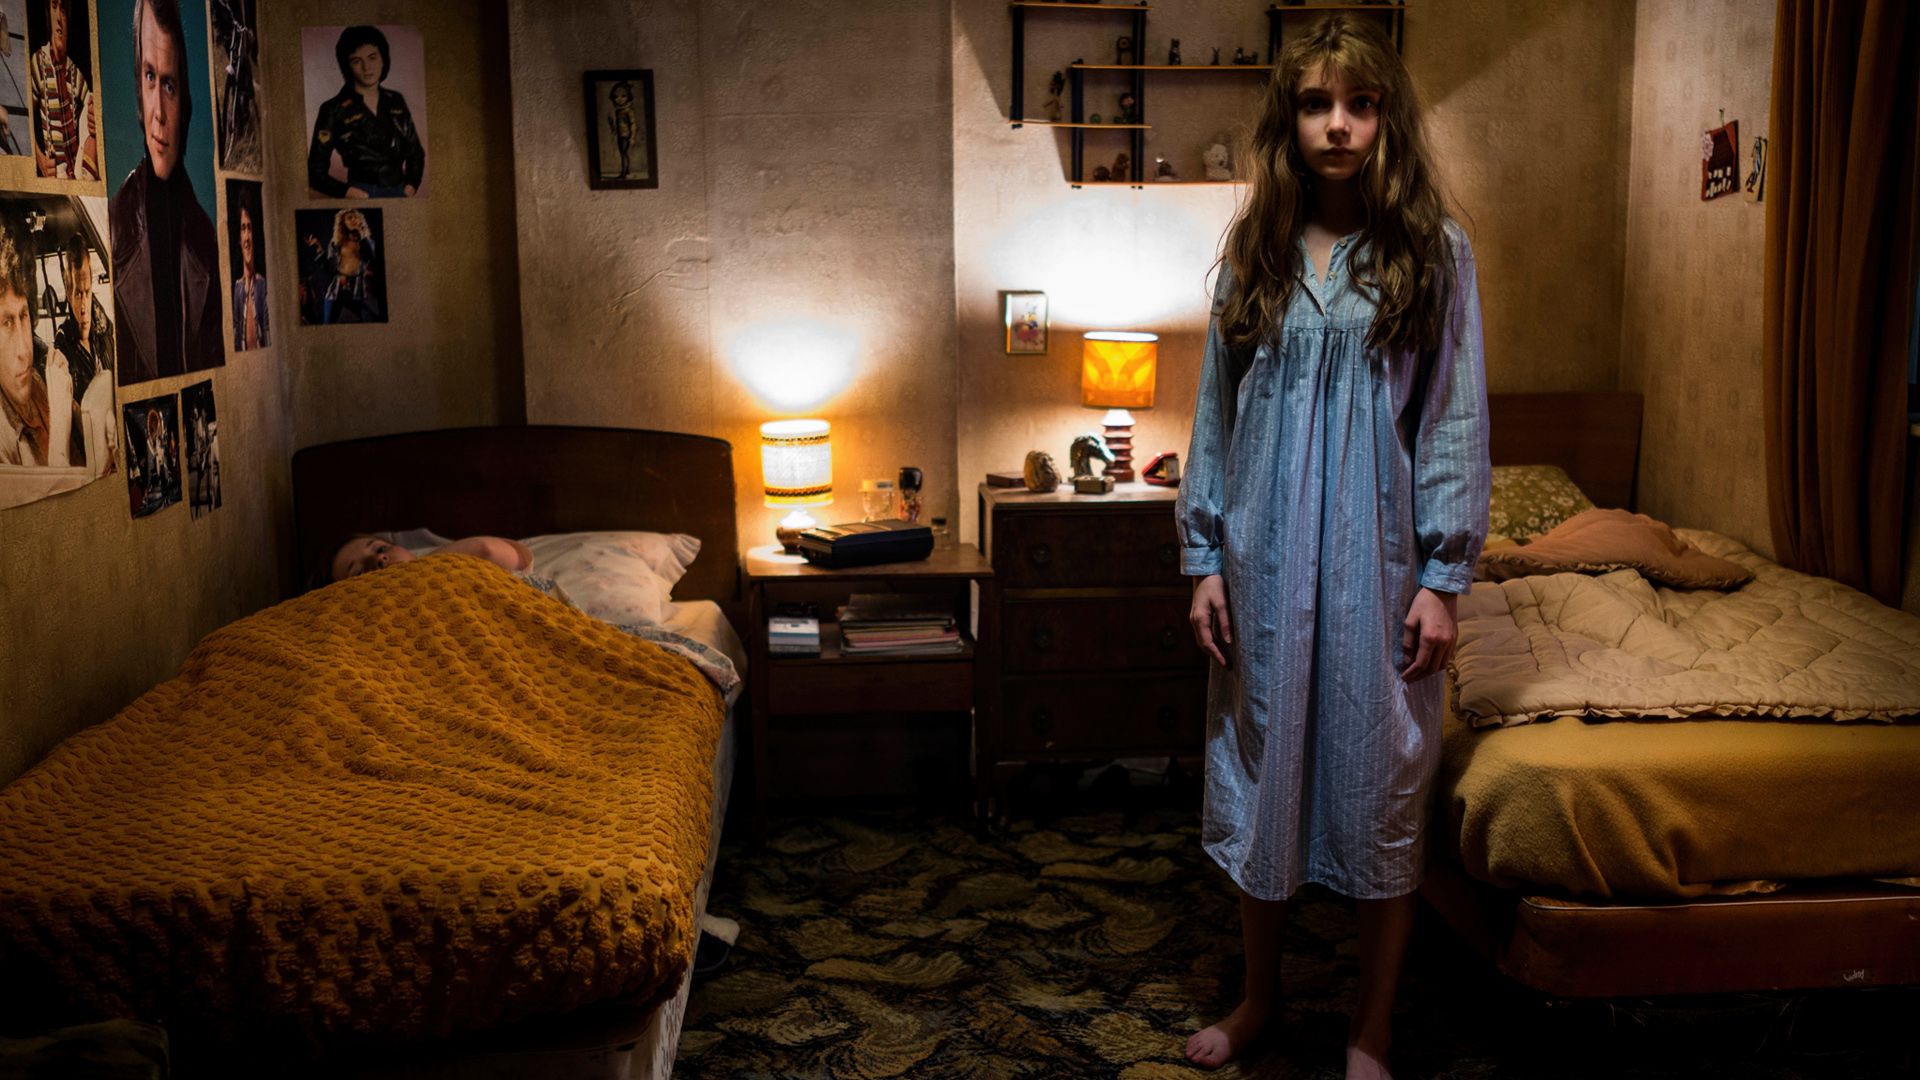 The Enfield Haunting background